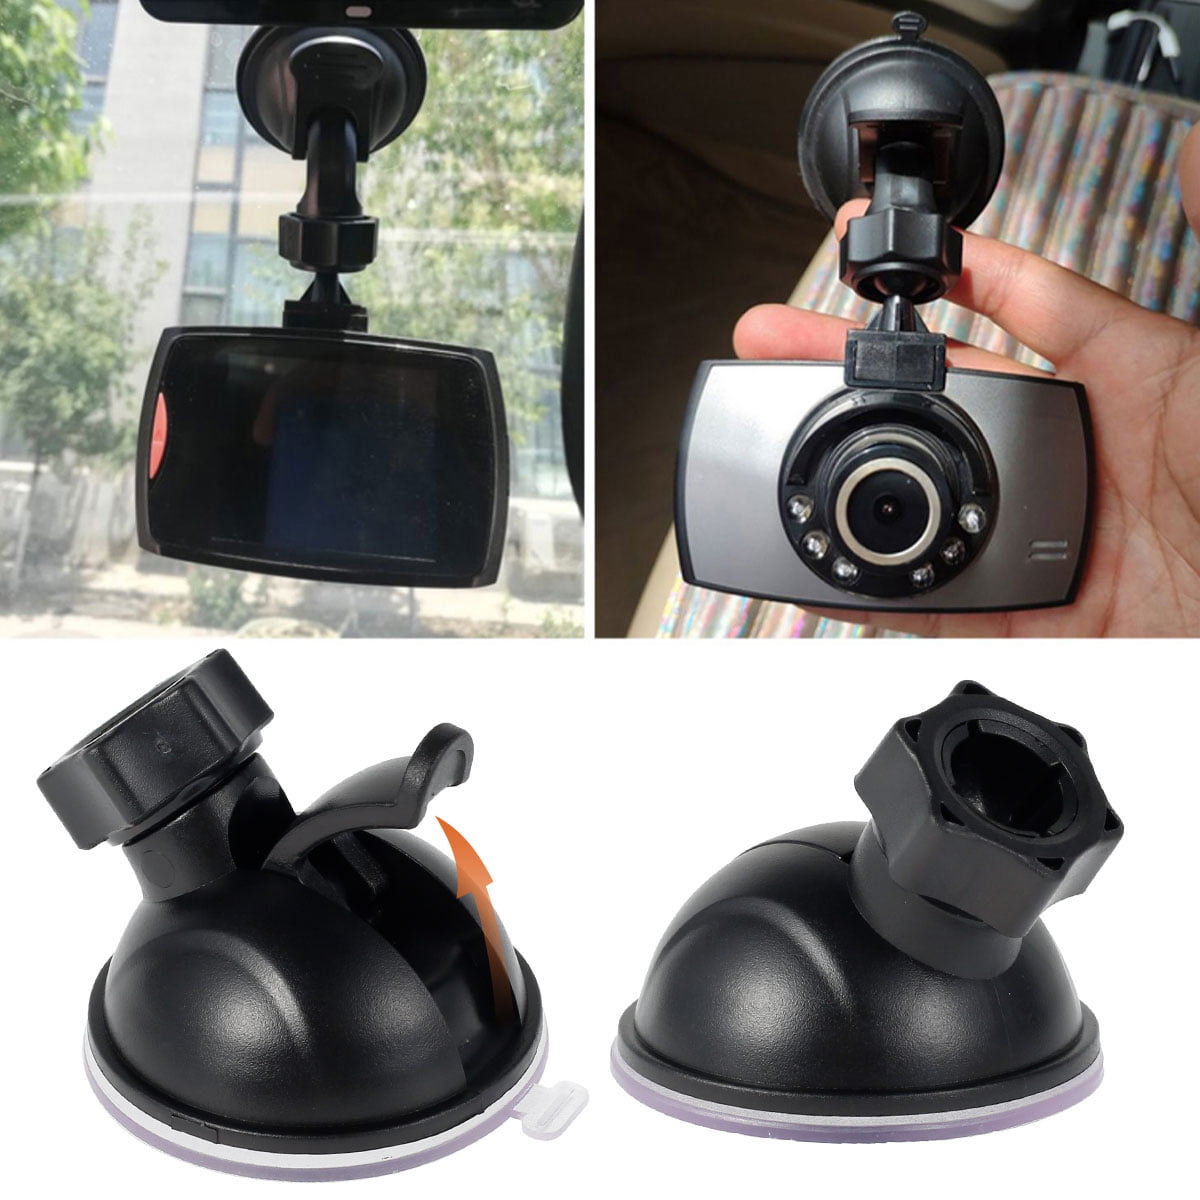 Windshield Suction Cup Mount/Holder for Xiaomi Yi Car Dash Cam DVR Video Camera 